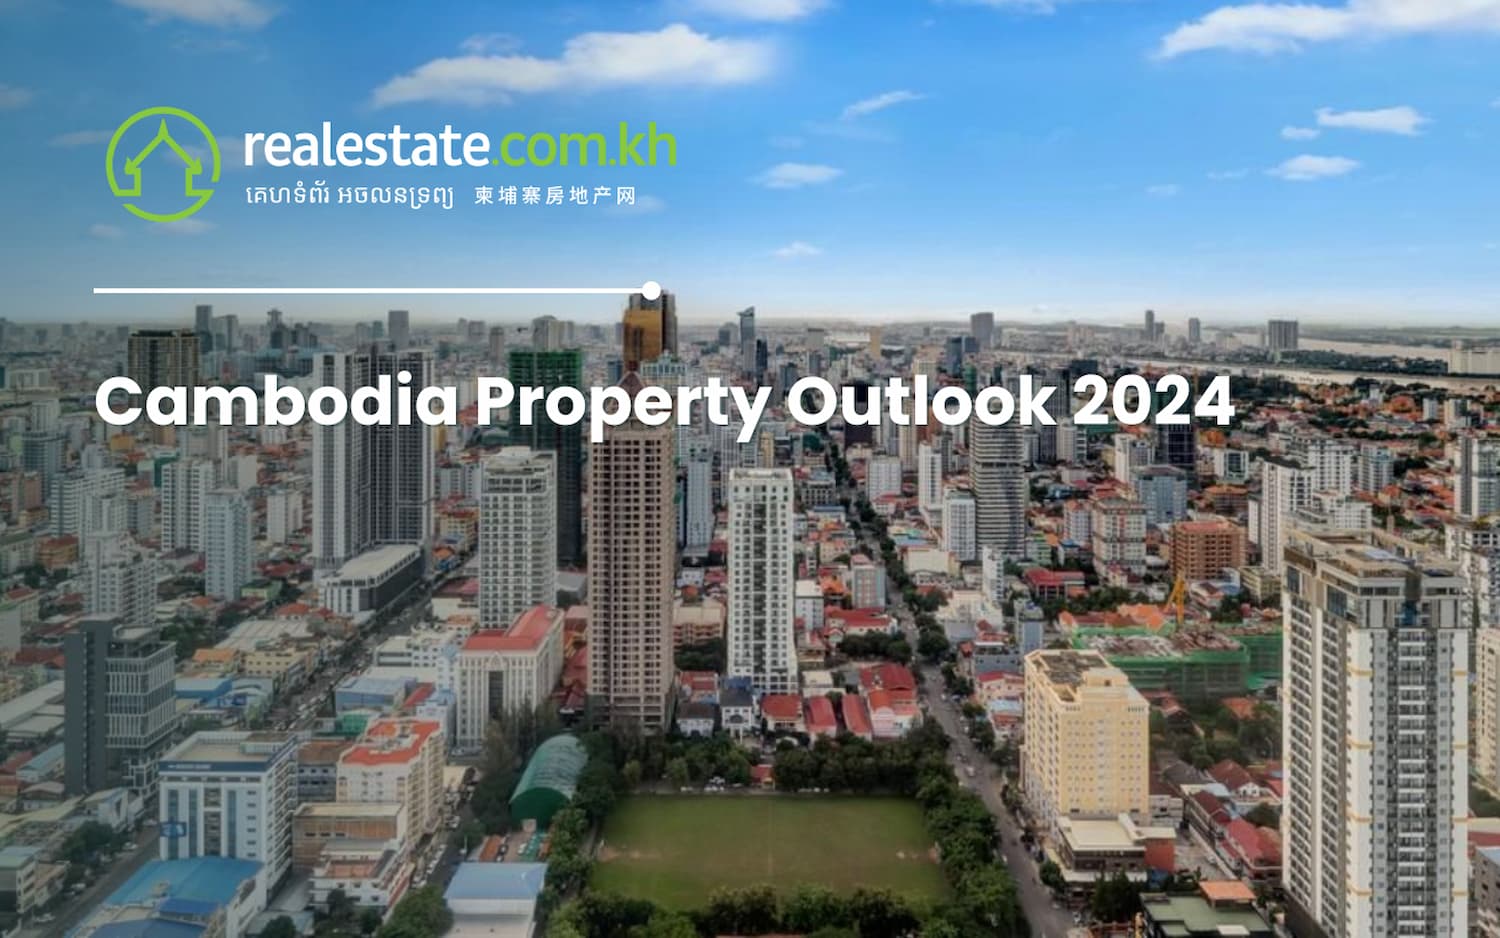 Cambodia Property Outlook 2024